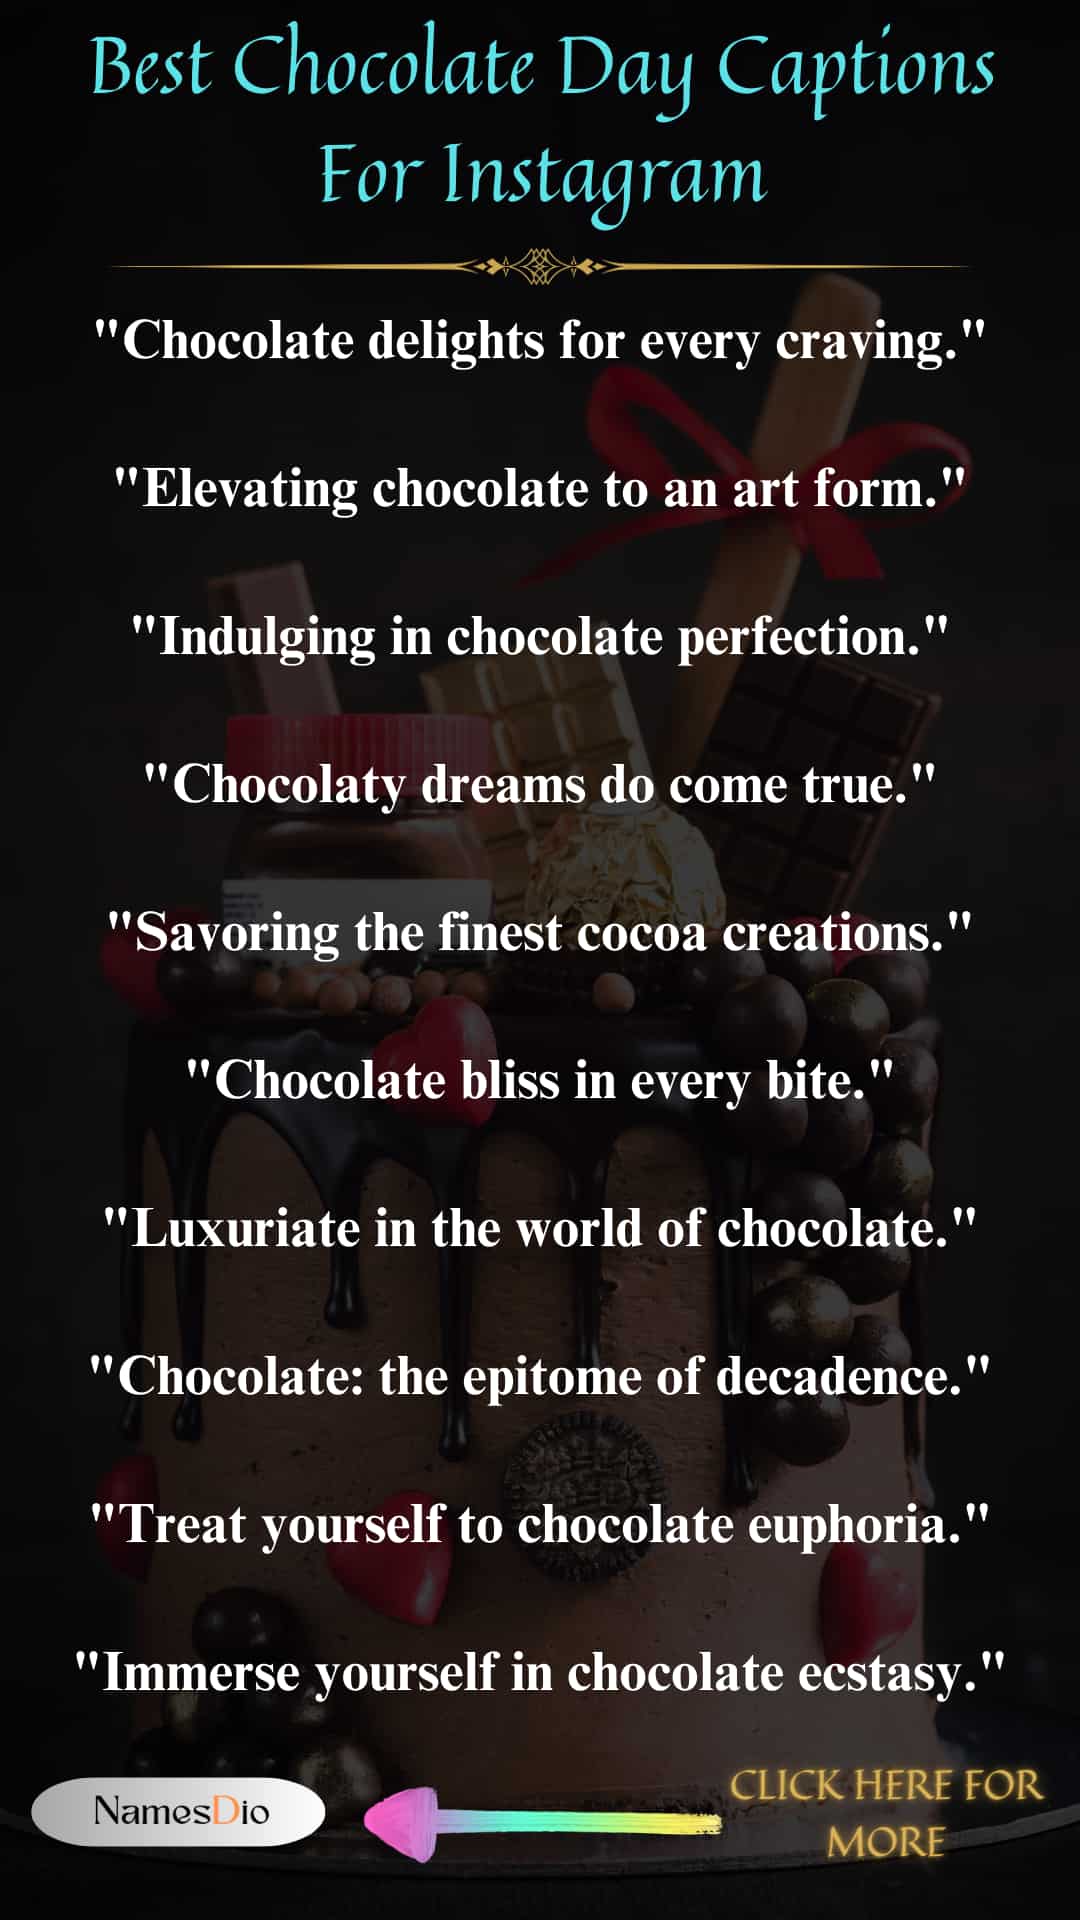 Best-Chocolate-Day-Captions-For-Instagram